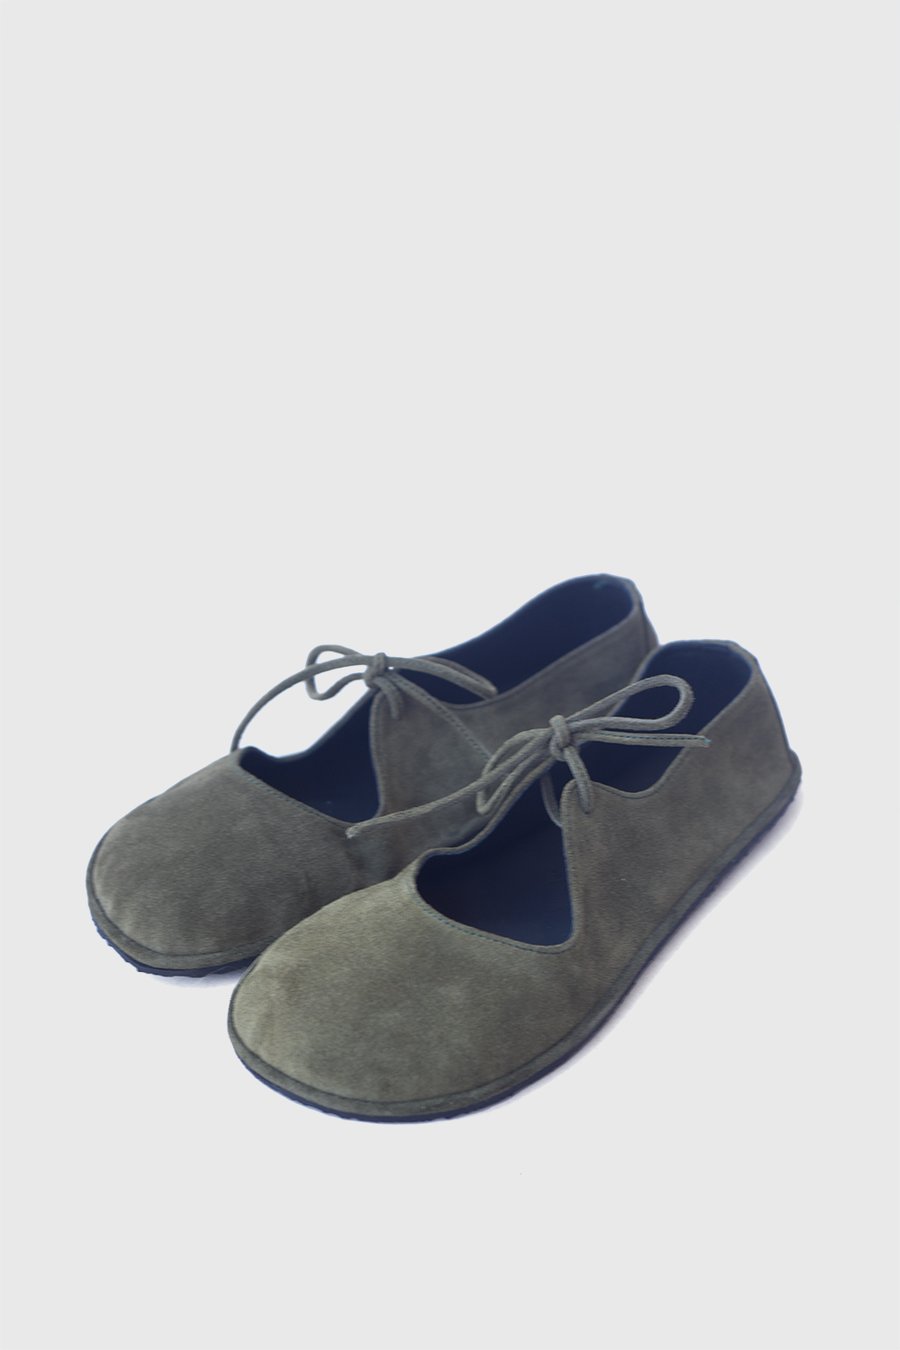 Image of Passion Ballet flats in Olive Suede -  39 EU - Ready to ship 